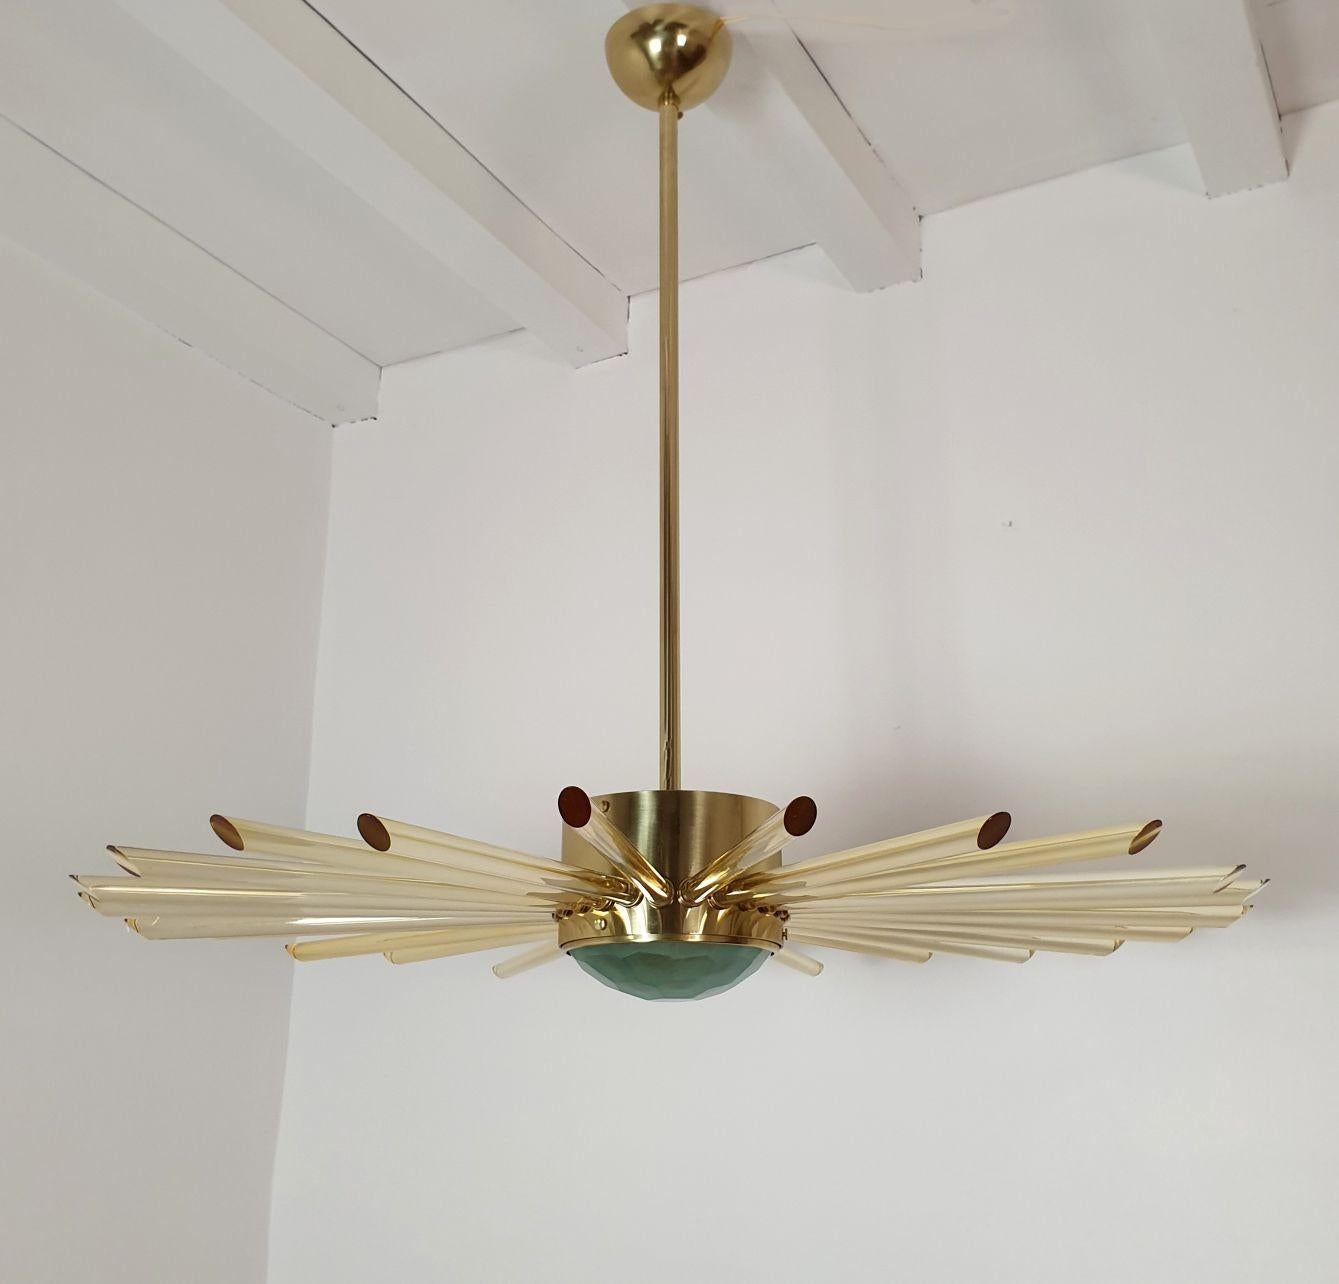 Large Mid Century Modern Sputnik chandelier, Italy 1980s.
The Mid Century Sputnik chandelier is made of a polished brass frame and golden yellow plain glass tubes.
The center bottom glass is pale green and translucent, nesting the light.
The vintage